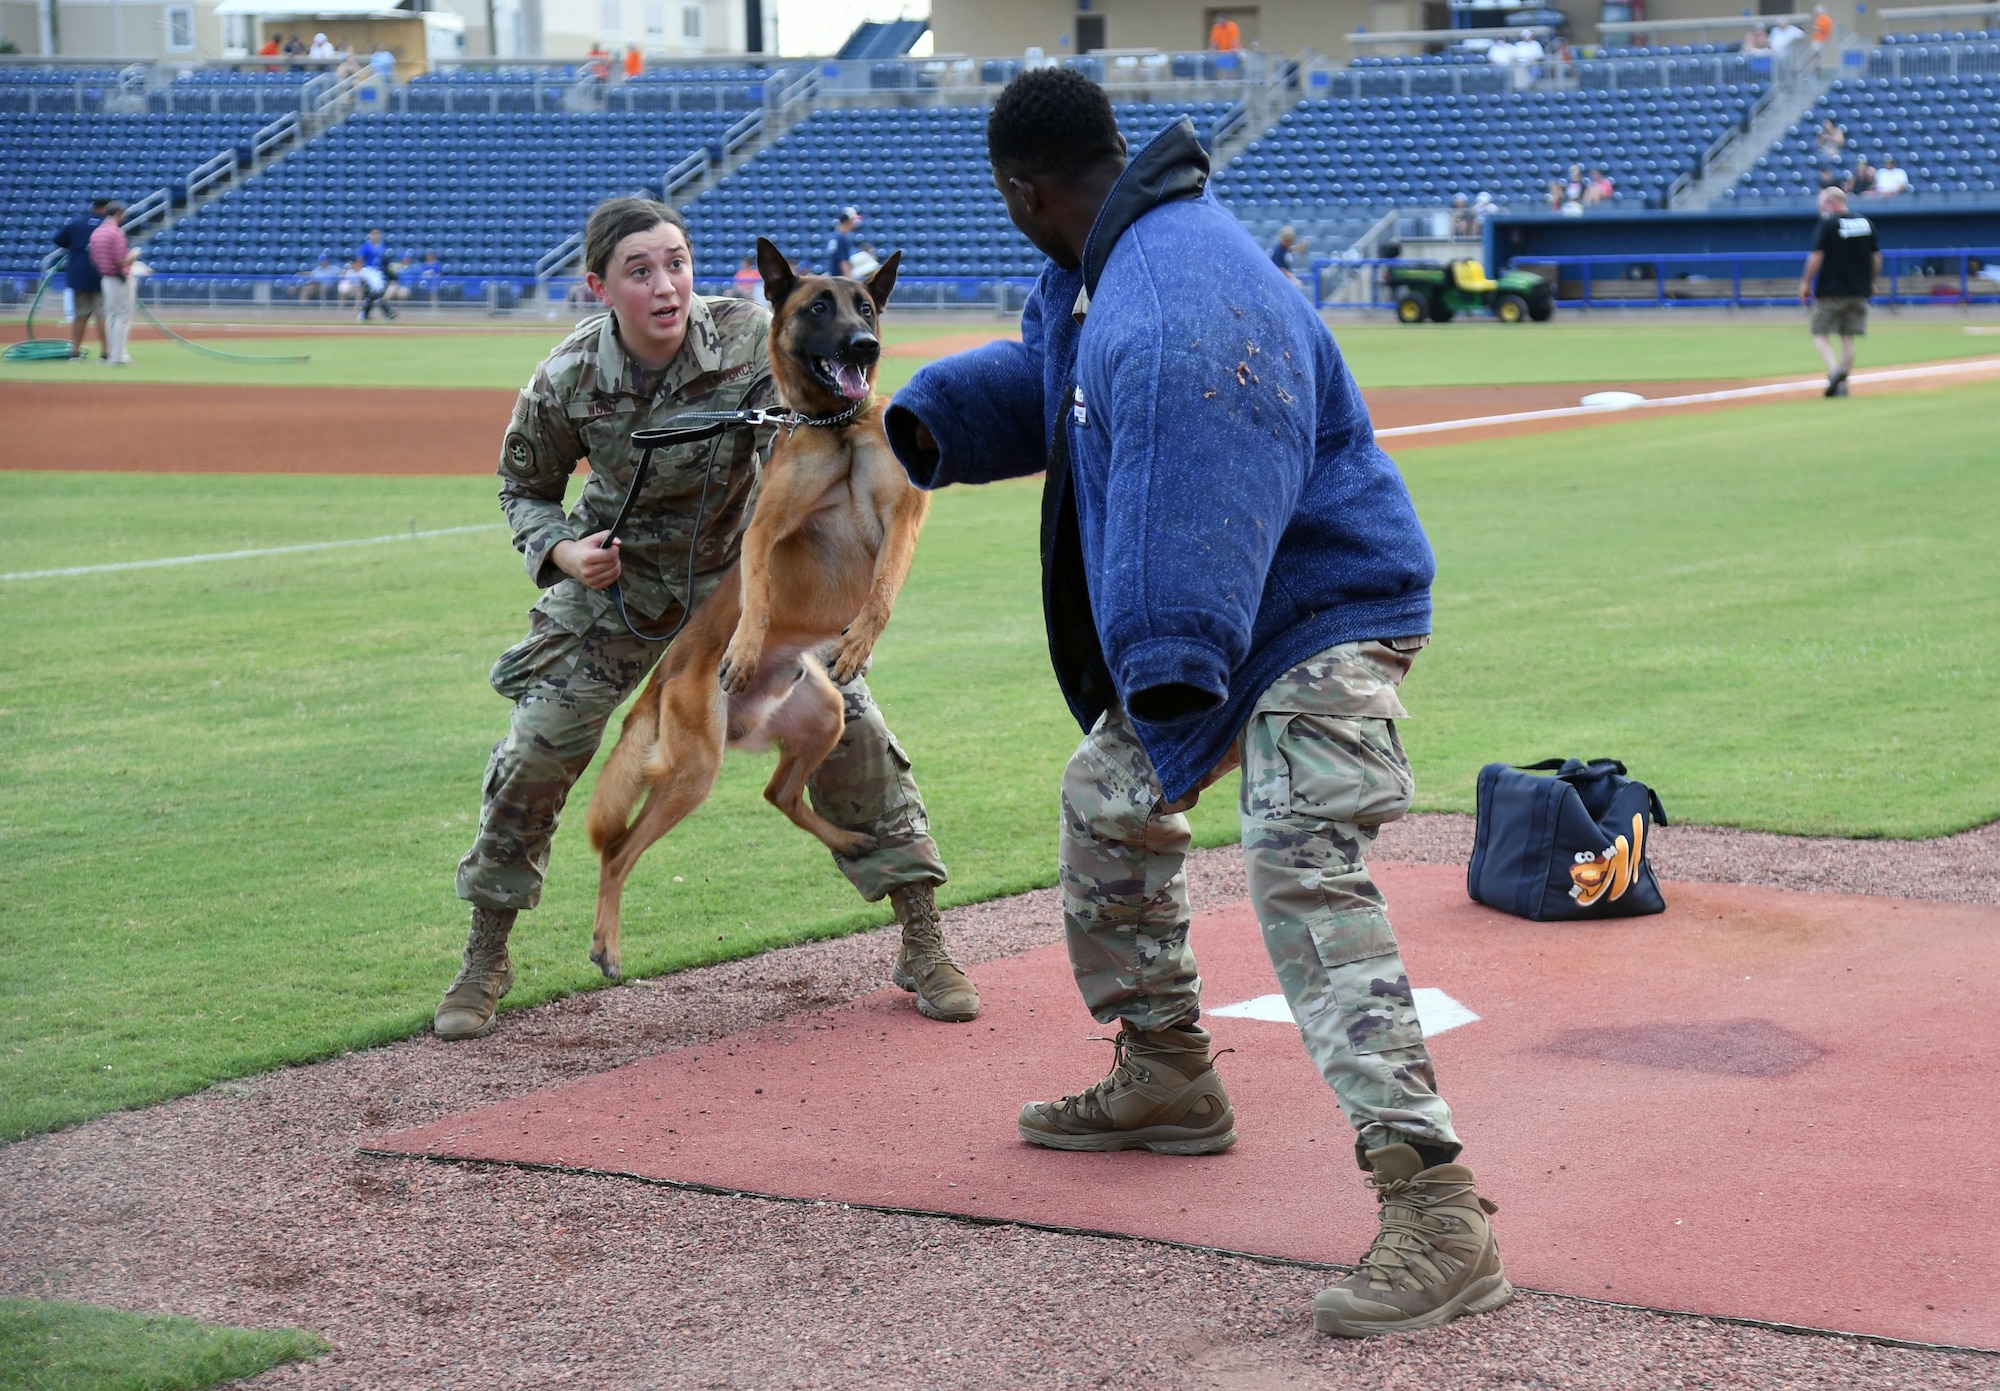 U.S. Air Force Senior Airman Ryan Wood and Staff Sgt. Victor Henderson, 81st Security Forces Squadron military working dog handlers, and Victor, 81st SFS military working dog, participate in a demonstration at the MGM Park during a Biloxi Shuckers Minor League Baseball team pre-game festivities in Biloxi, Mississippi, Aug.1, 2021. The "Bark in the Park" themed baseball game invited fans to attend the game with their dogs. (U.S. Air Force photo by Kemberly Groue)